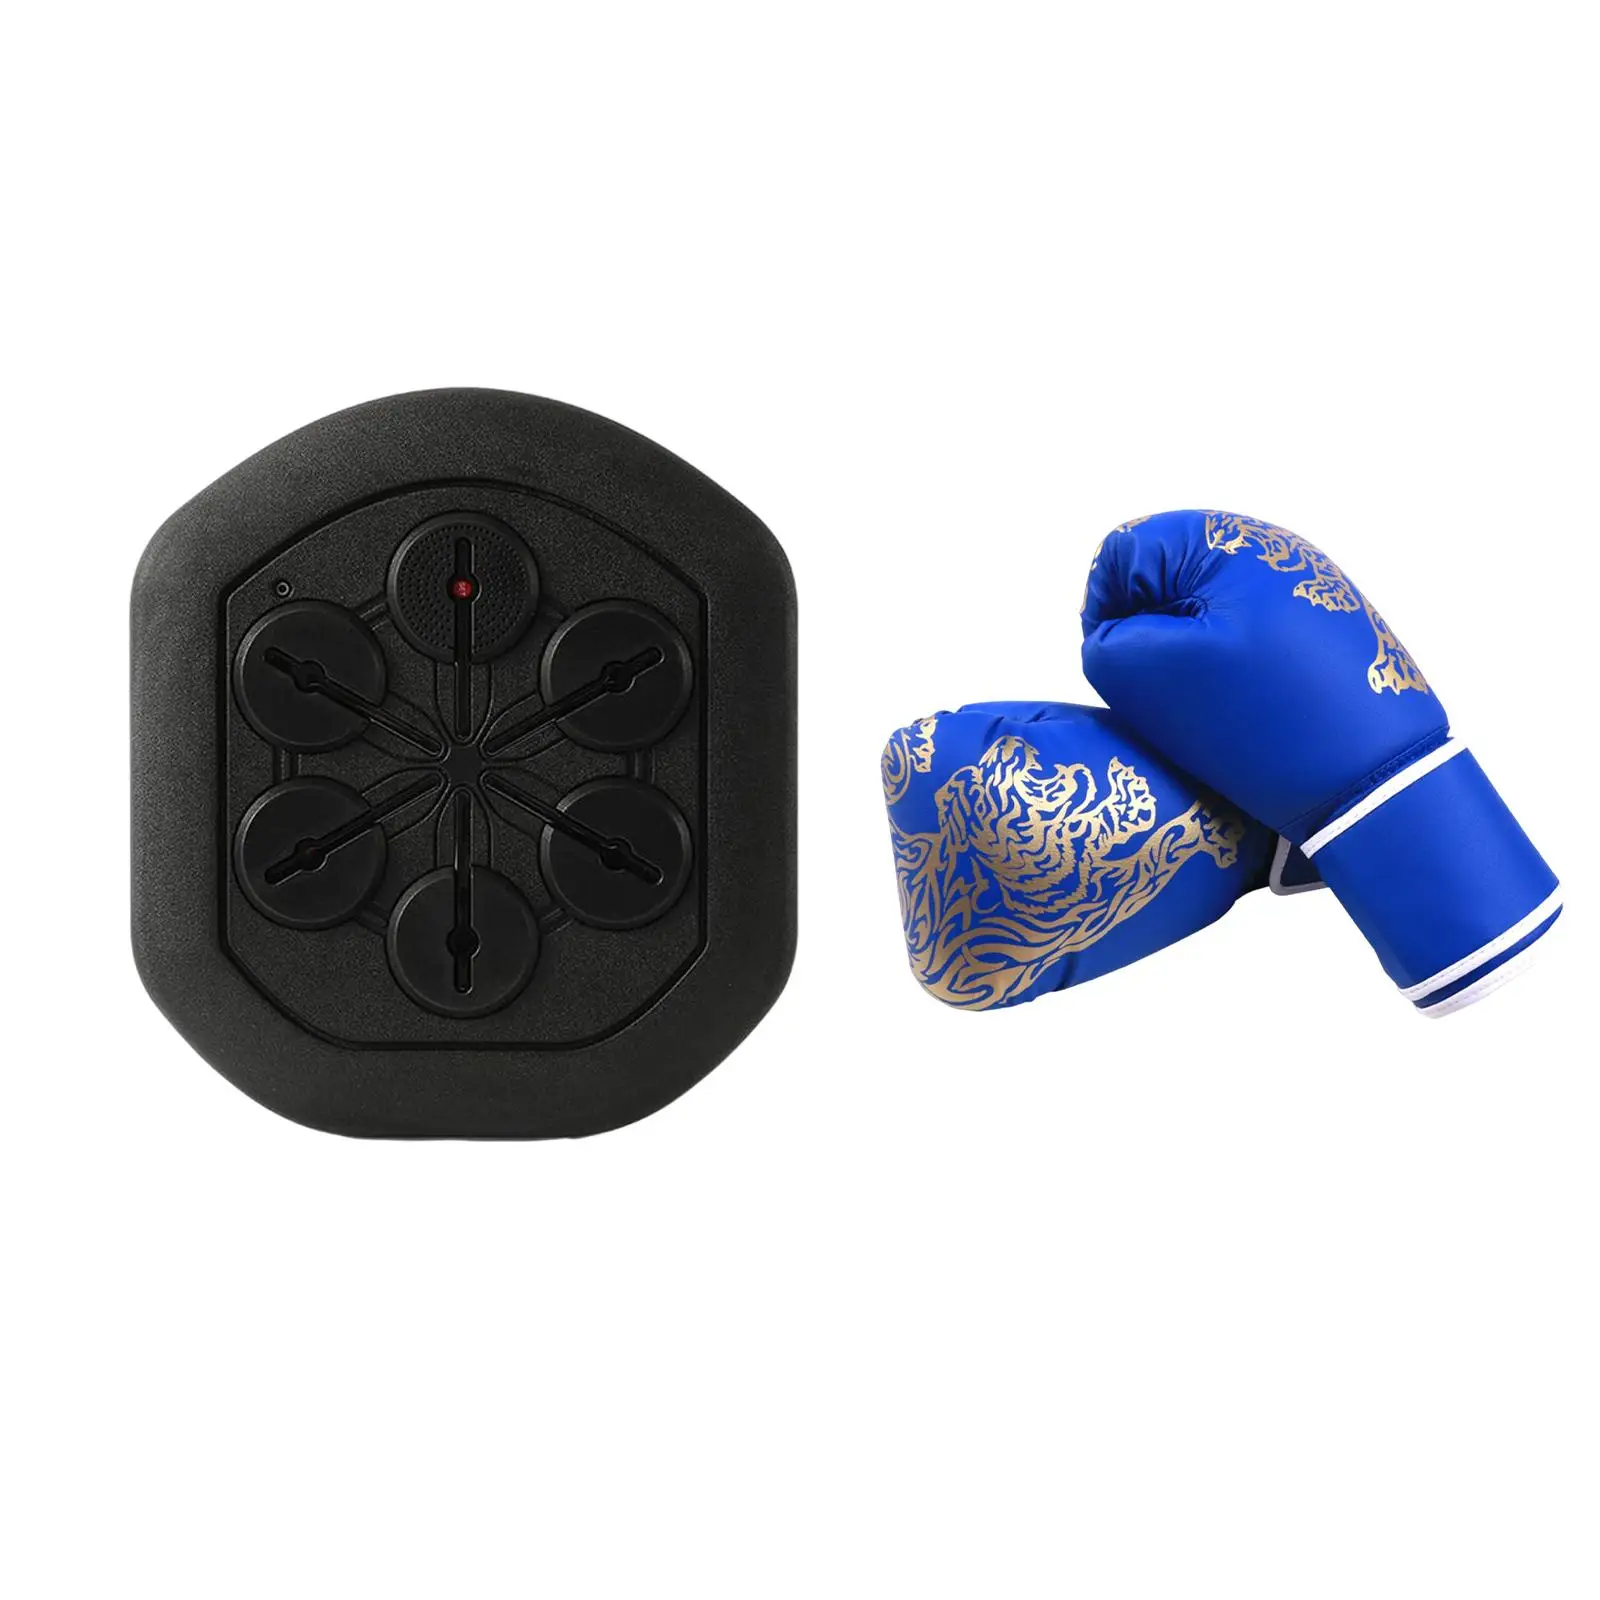 Smart Boxing Wall Target Reaction Target Wall Mounted Boxing Practice